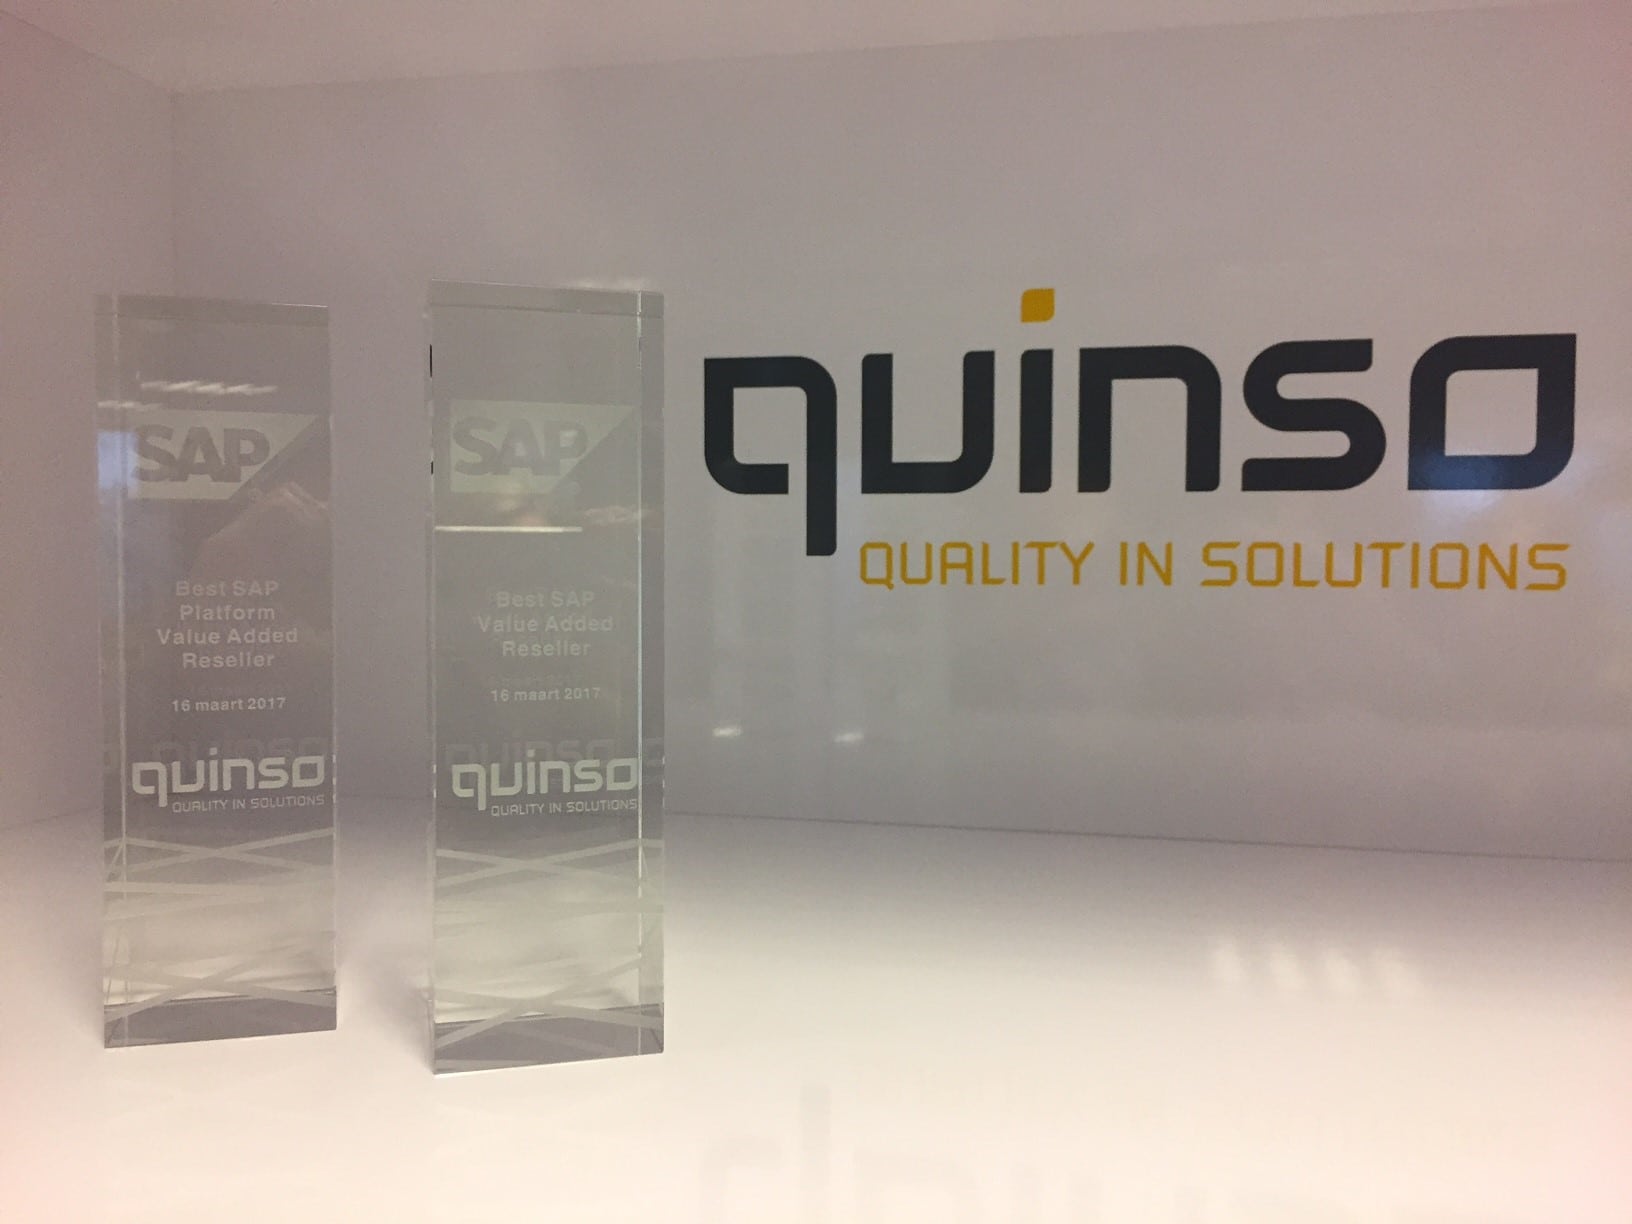 Quinso overall winner at SAP Partner Awards 2016 with 2 awards and 1 nomination